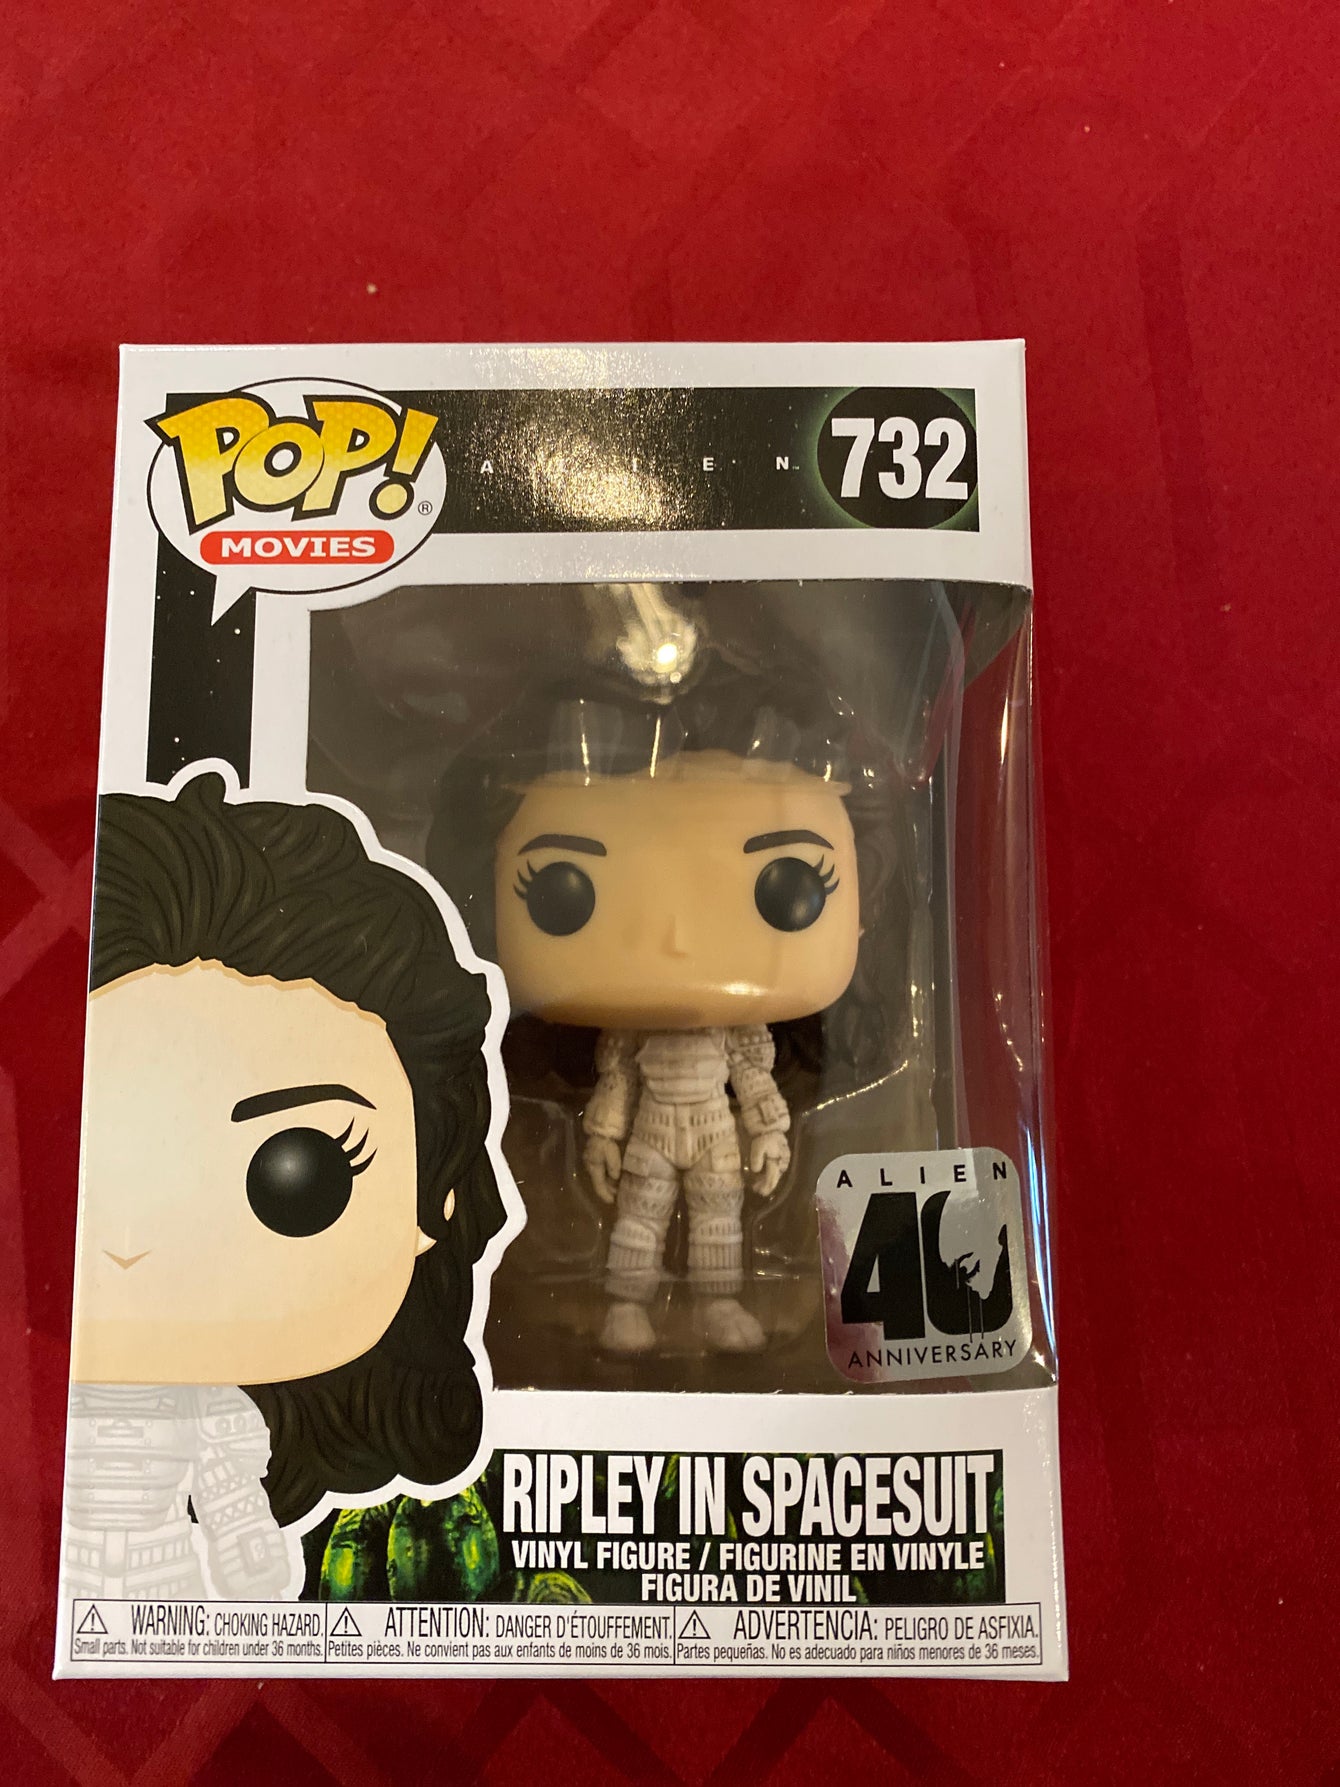 Ripley in Spacesuit 40th anniversary